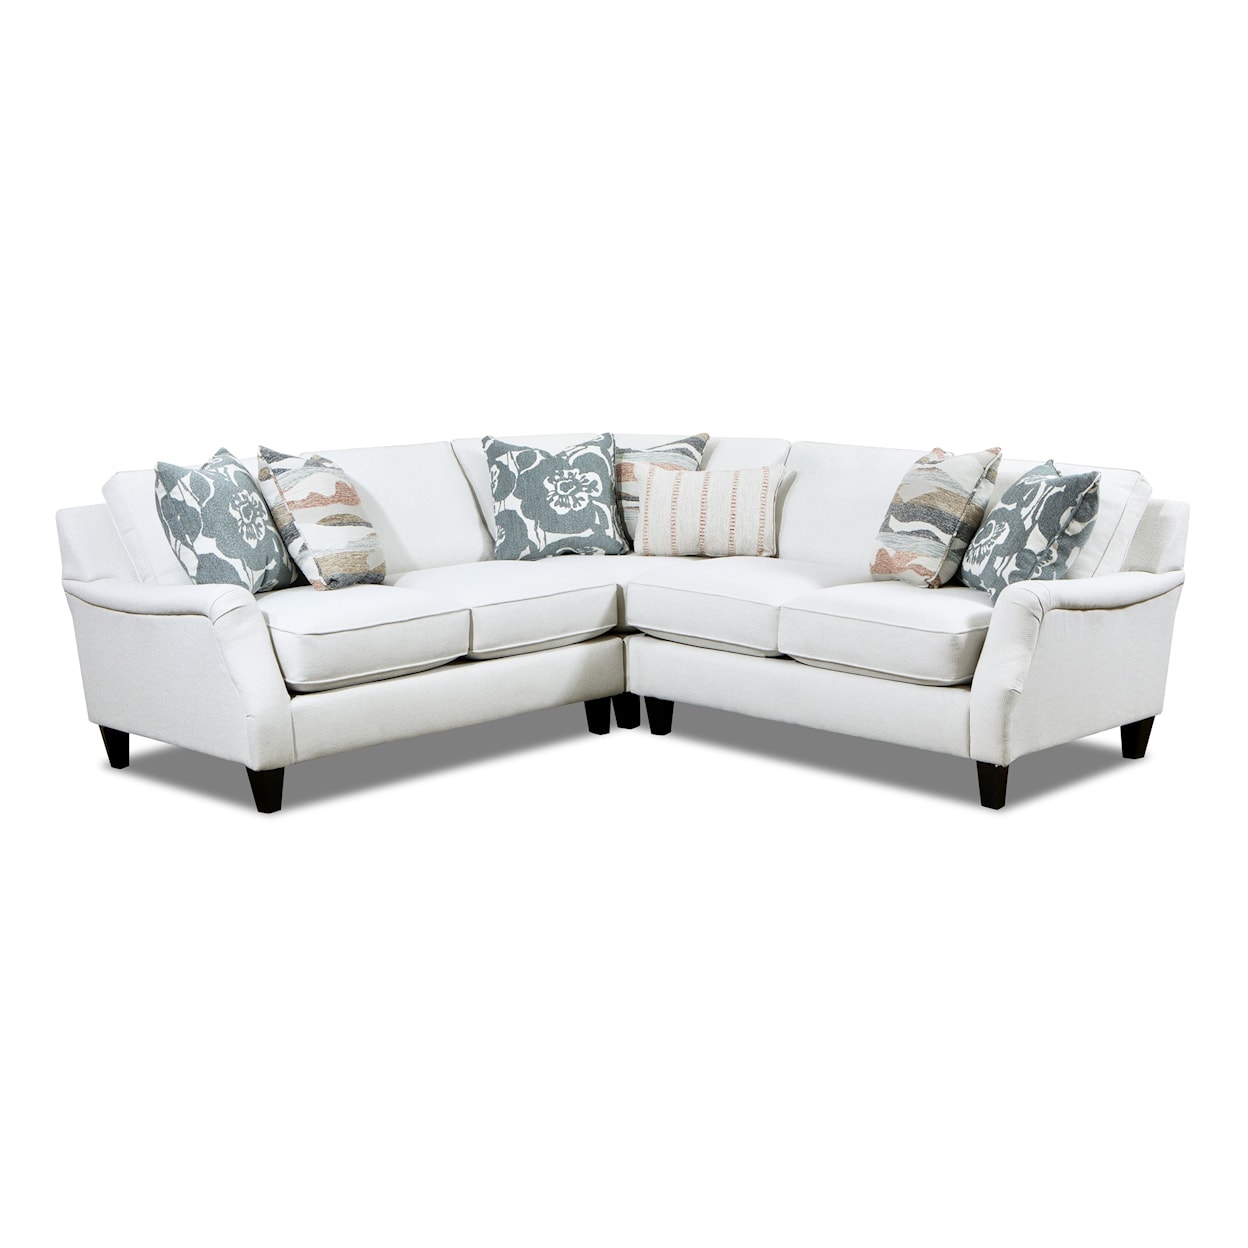 Fusion Furniture 7002 MISSIONARY SALT 3-Piece Sectional